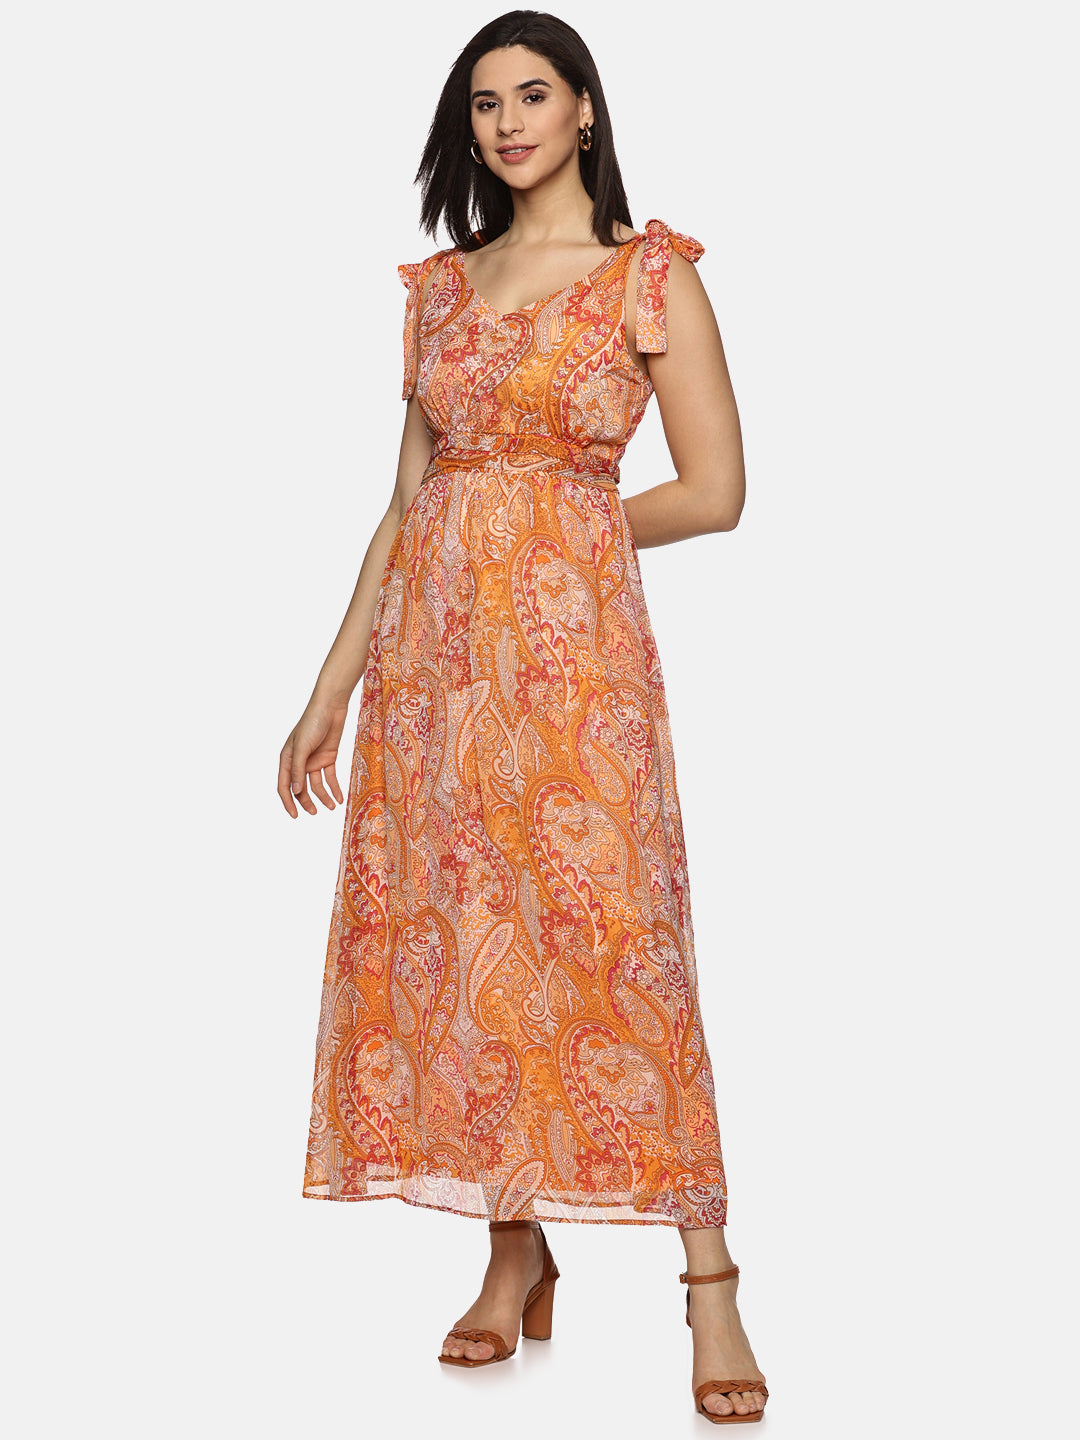 Buy Printed Floral Chiffon Fabric | Tie-up Detailed Maxi Dress Online In India